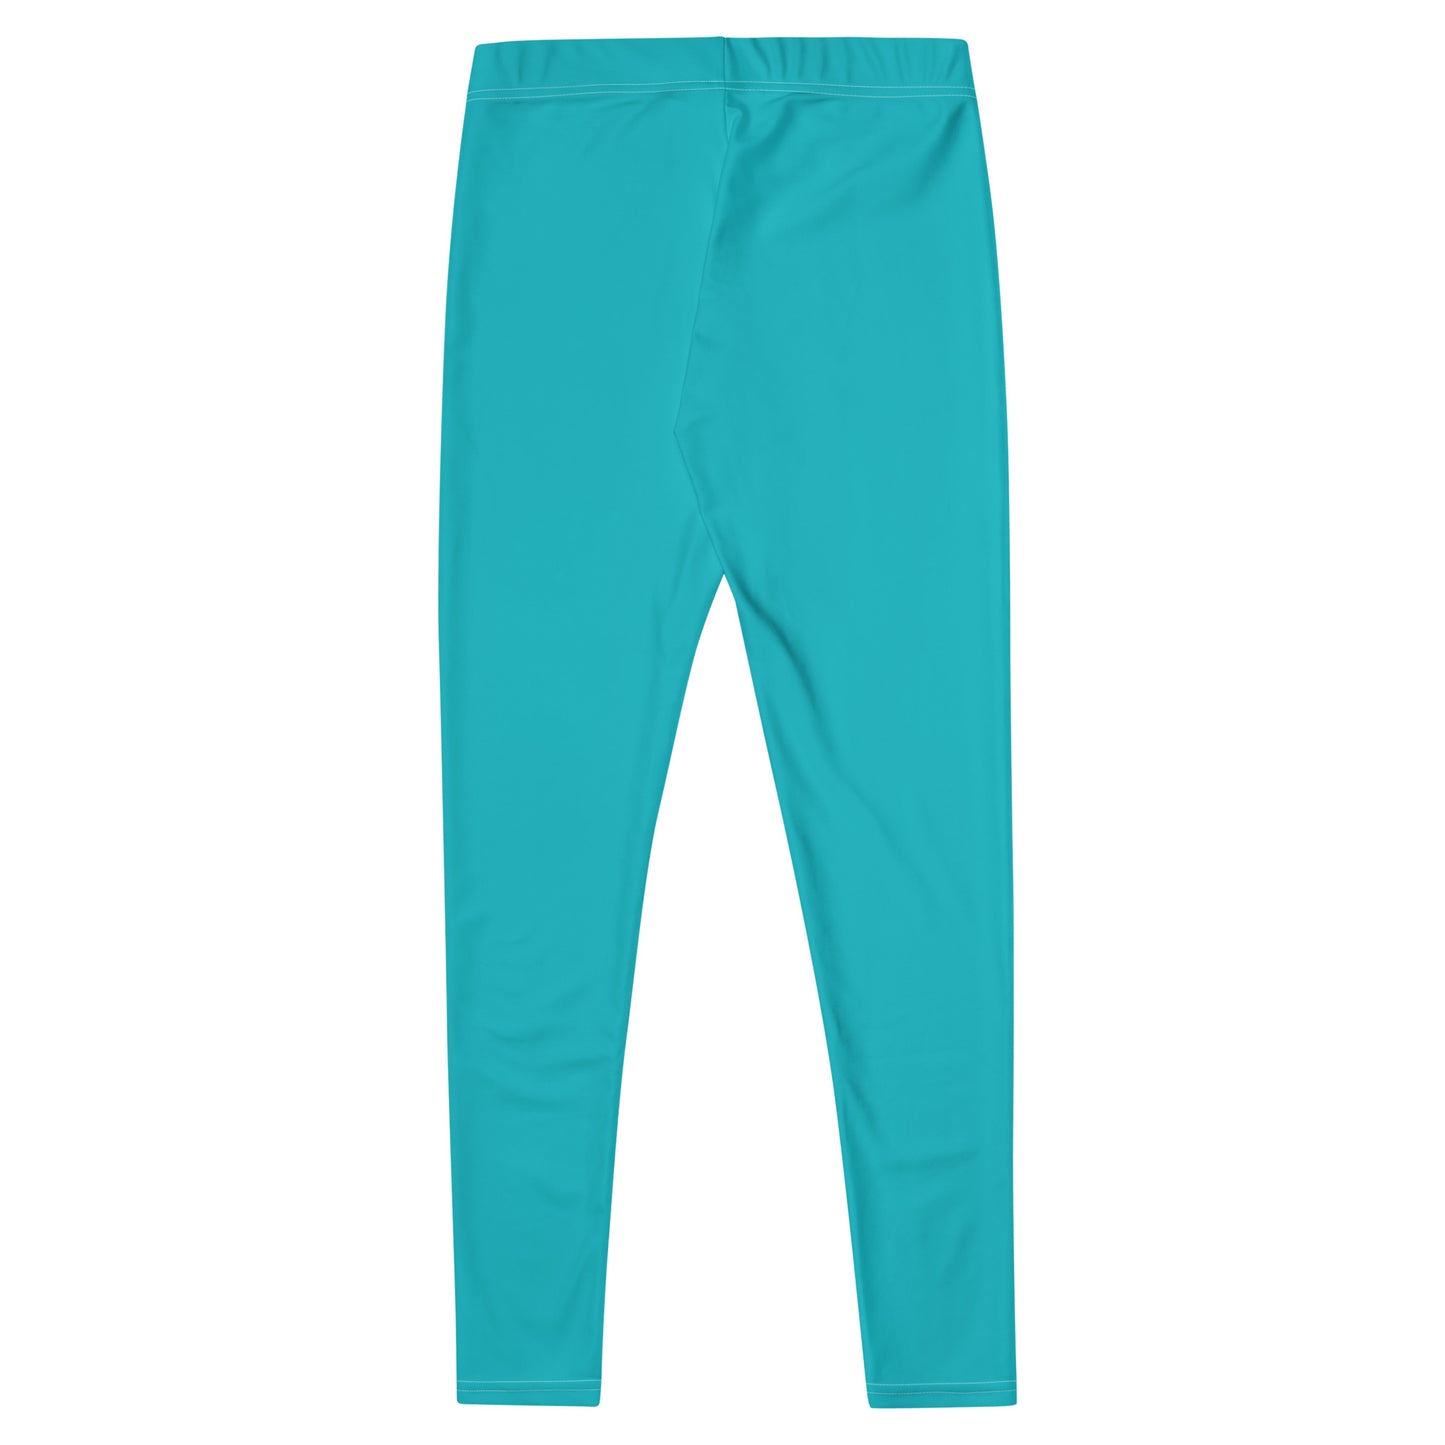 Cyan Climate Change Global Warming Statement - Sustainably Made Women's Leggings